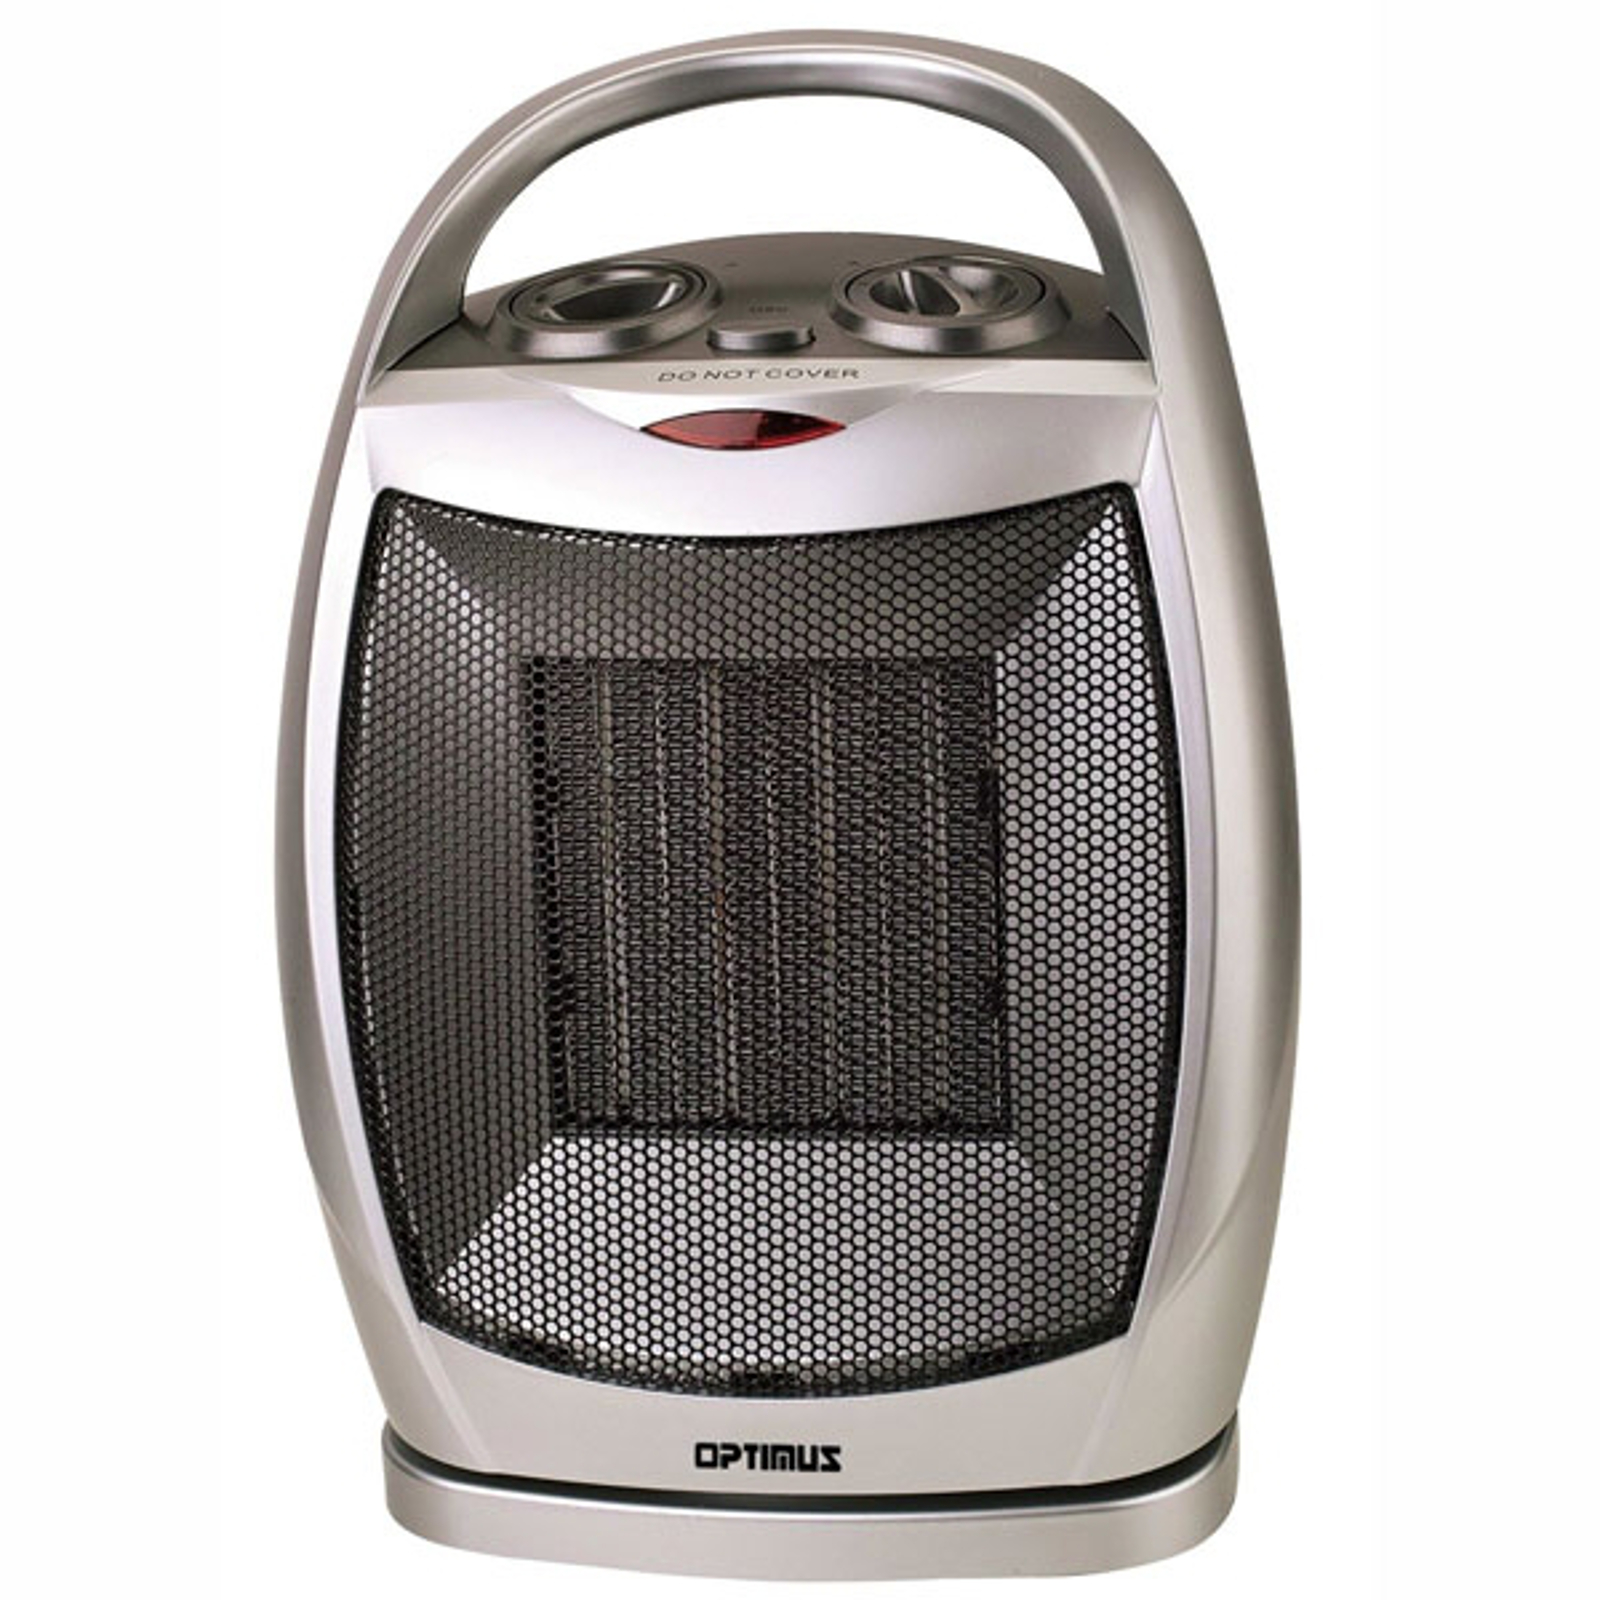 Chef'sChoice 97078897M Portable Oscillating Ceramic Heater with Thermostat